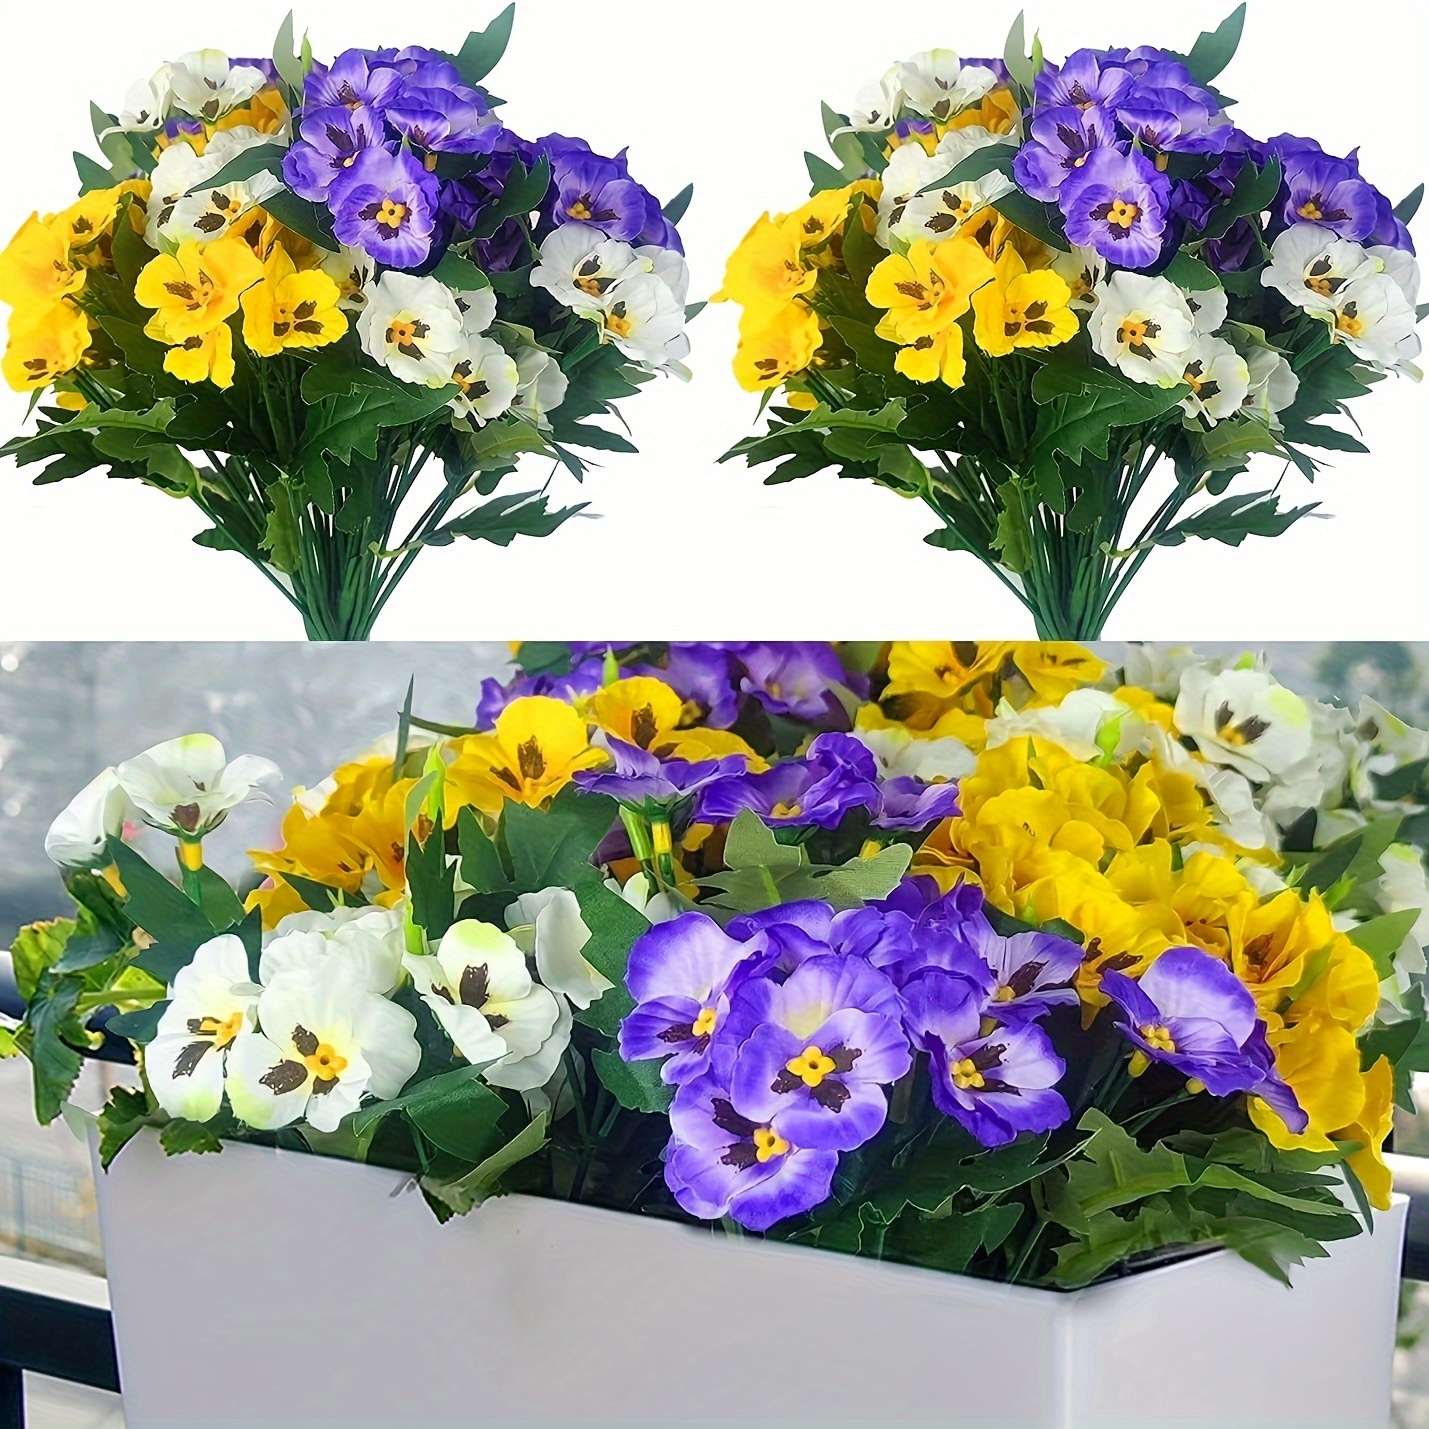 

6pcs Fake Flowers Pansy Small Wild Flower Daisy, Faux Plastic Purple Flowers For Home Wedding Kitchen Garden Table Centerpieces Indoor Outdoor Decor